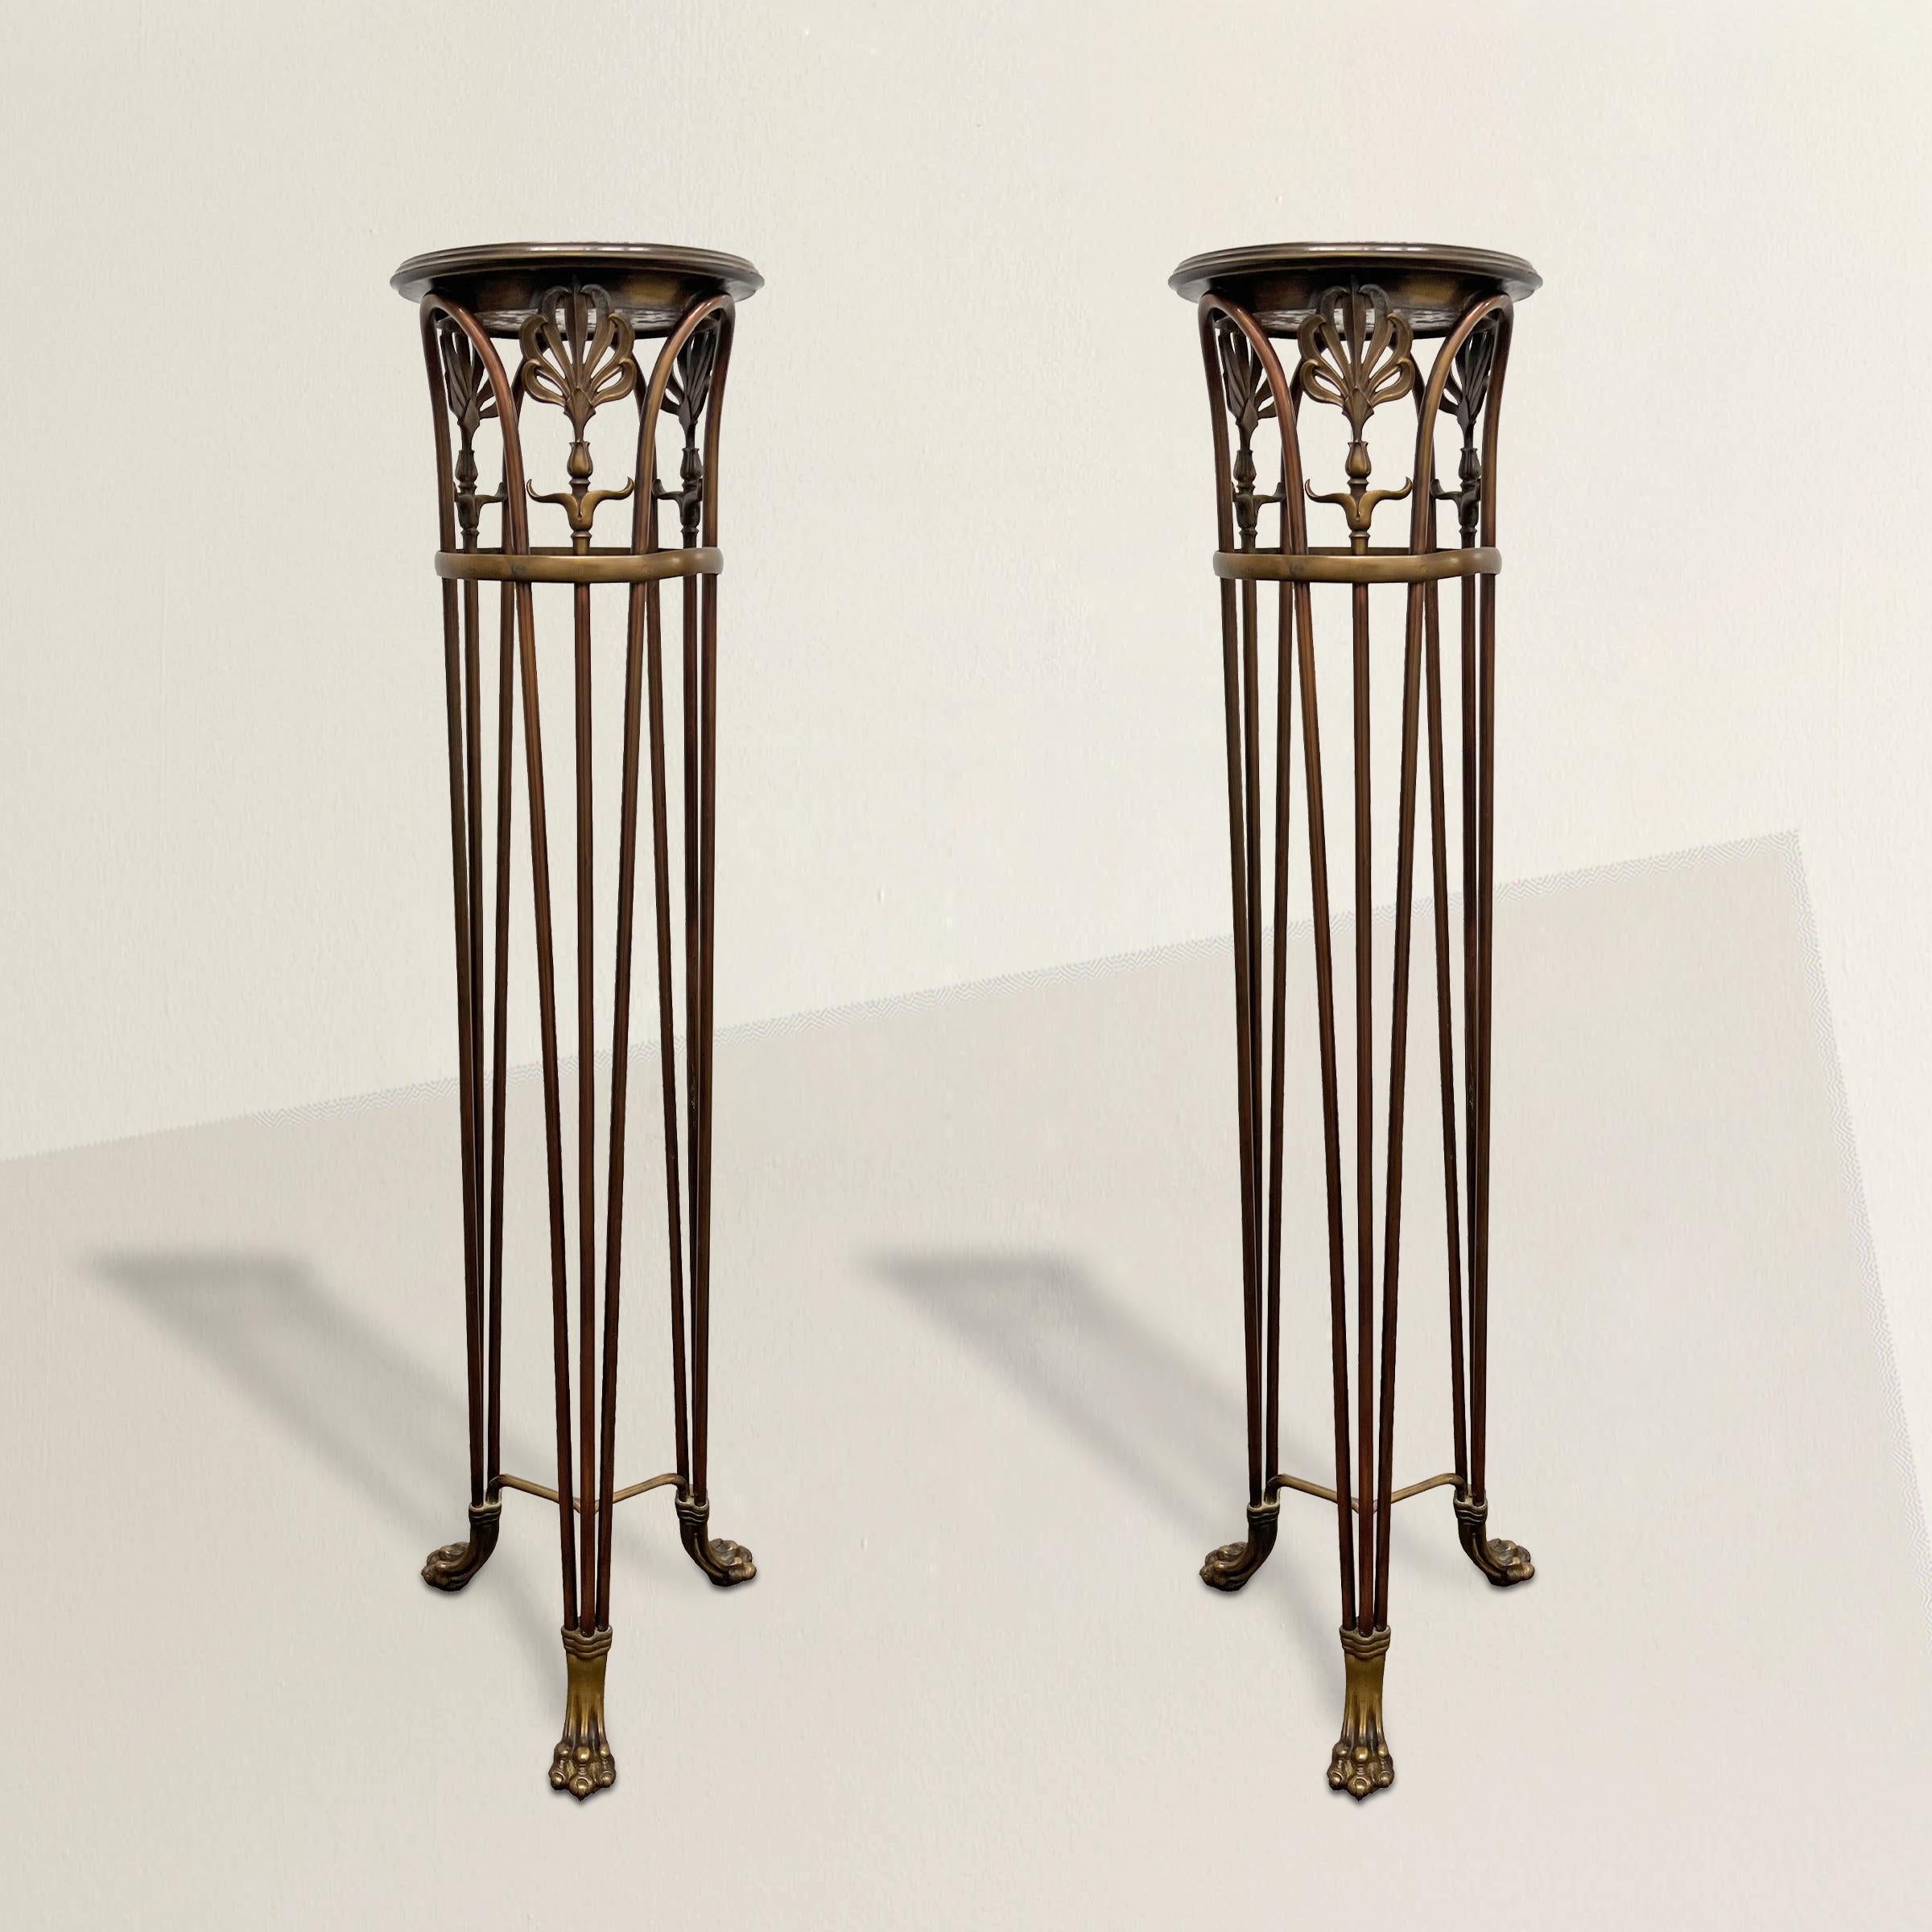 Indulge in the timeless elegance of this extraordinary pair of early 20th century American Beaux-Arts bronze plant stands by famed American foundry, Gorham, which effortlessly transform into pedestals for your cherished objet d'art. Crafted with